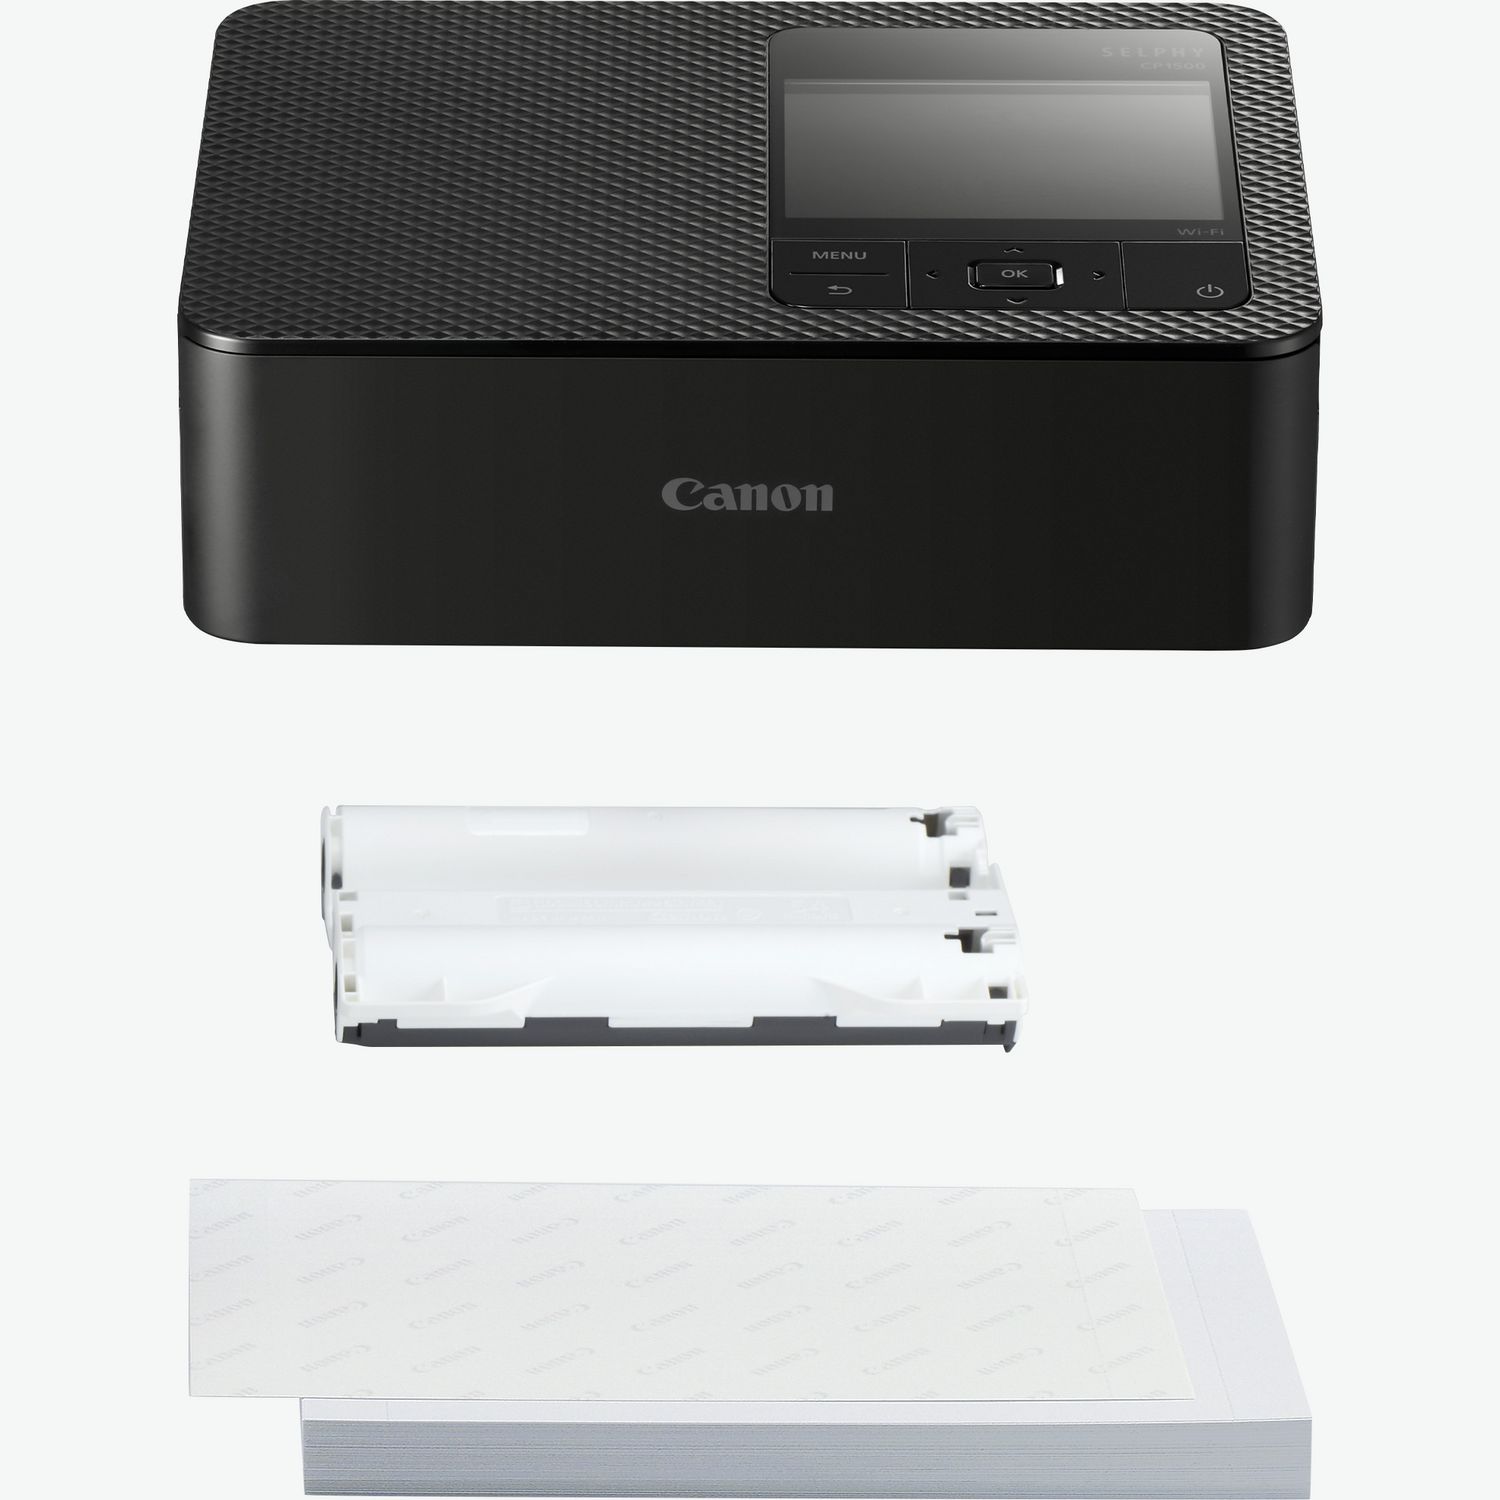  Canon SELPHY CP1500 Wireless Compact Photo Printer with  AirPrint and Mopria Device Printing, Black, with Canon KP108 Paper and  Black Hard case to fit All Together : Office Products